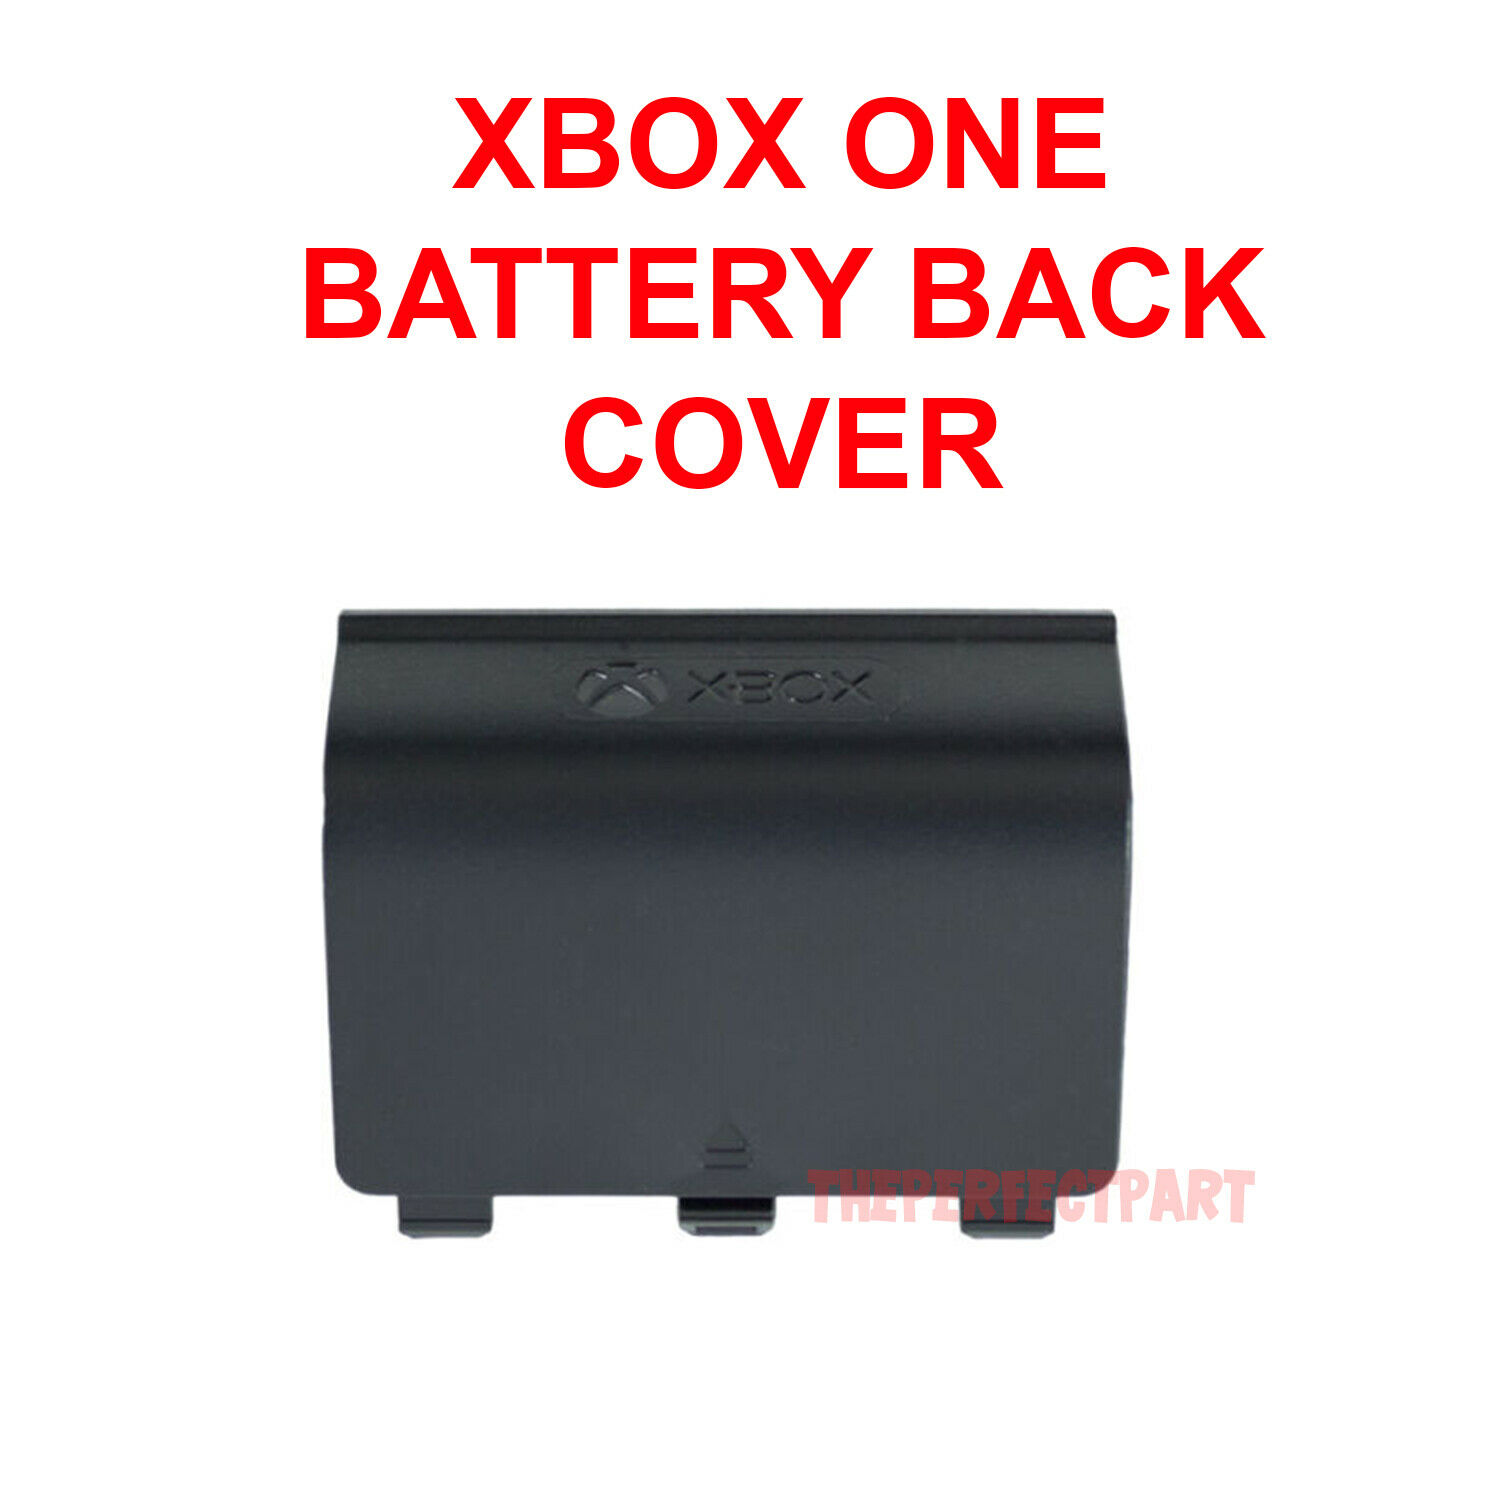 Battery Cover Door Shell Replacement For Original Xbox One Wireless Controller